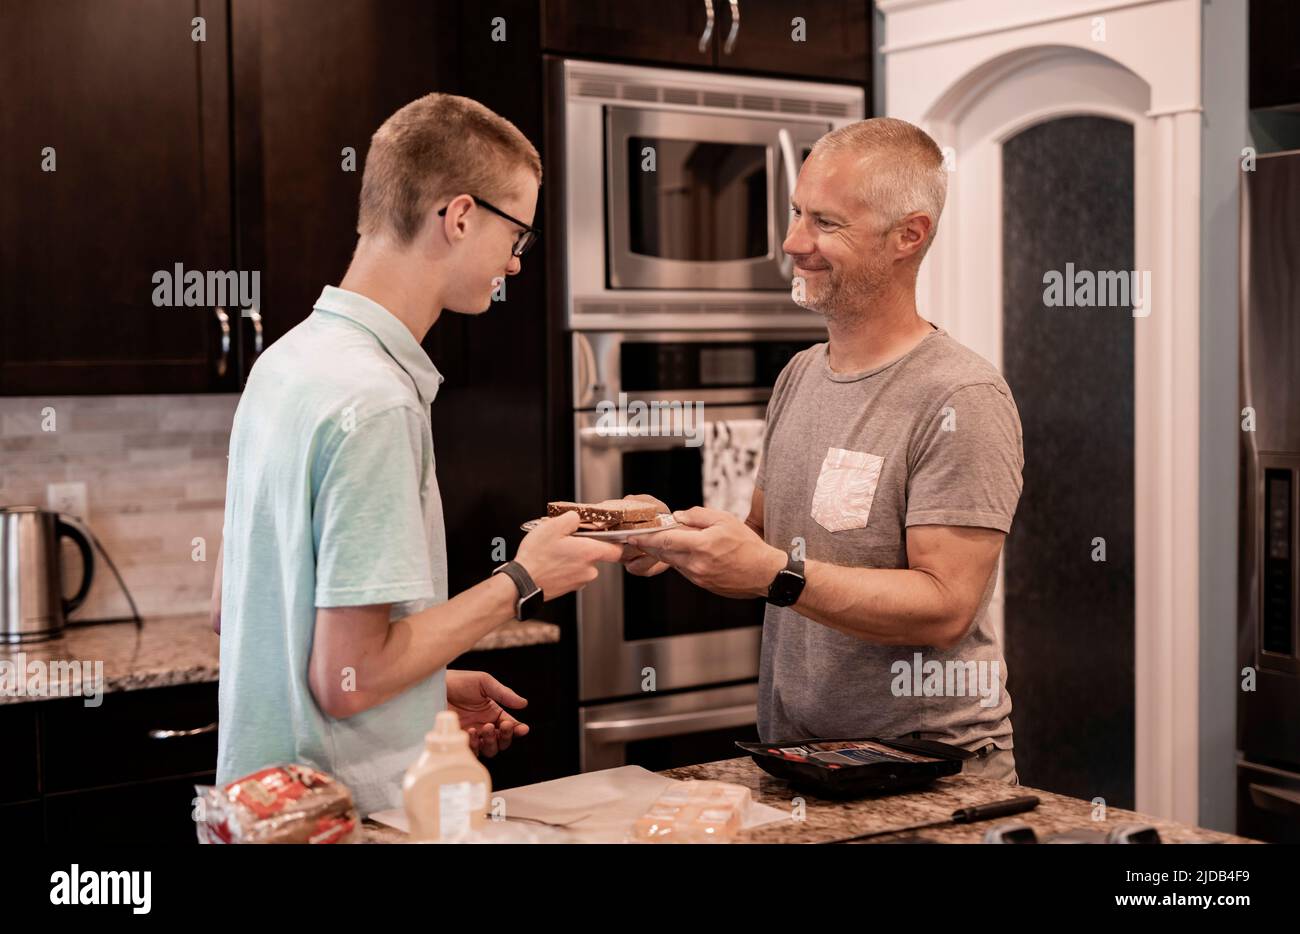 Young man serving his dad a sandwich in the kitchen at home; Edmonton, Alberta, Canada Stock Photo